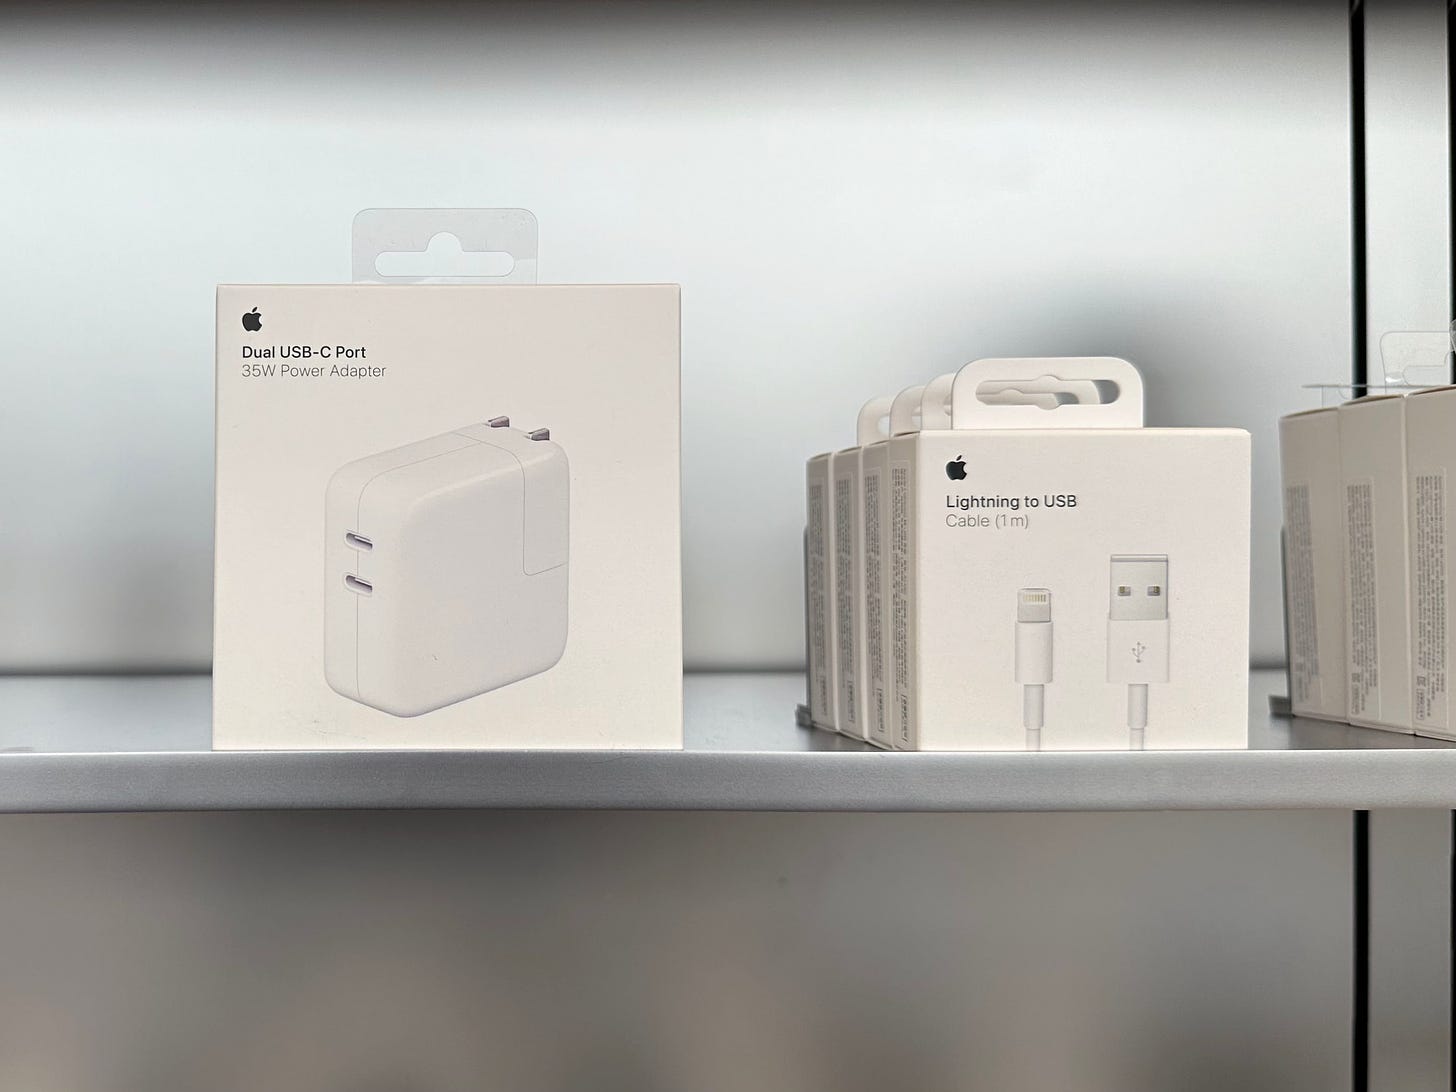 Old and new Apple charging accessories. The old box has a plastic tag, and the new box has a paper tag.